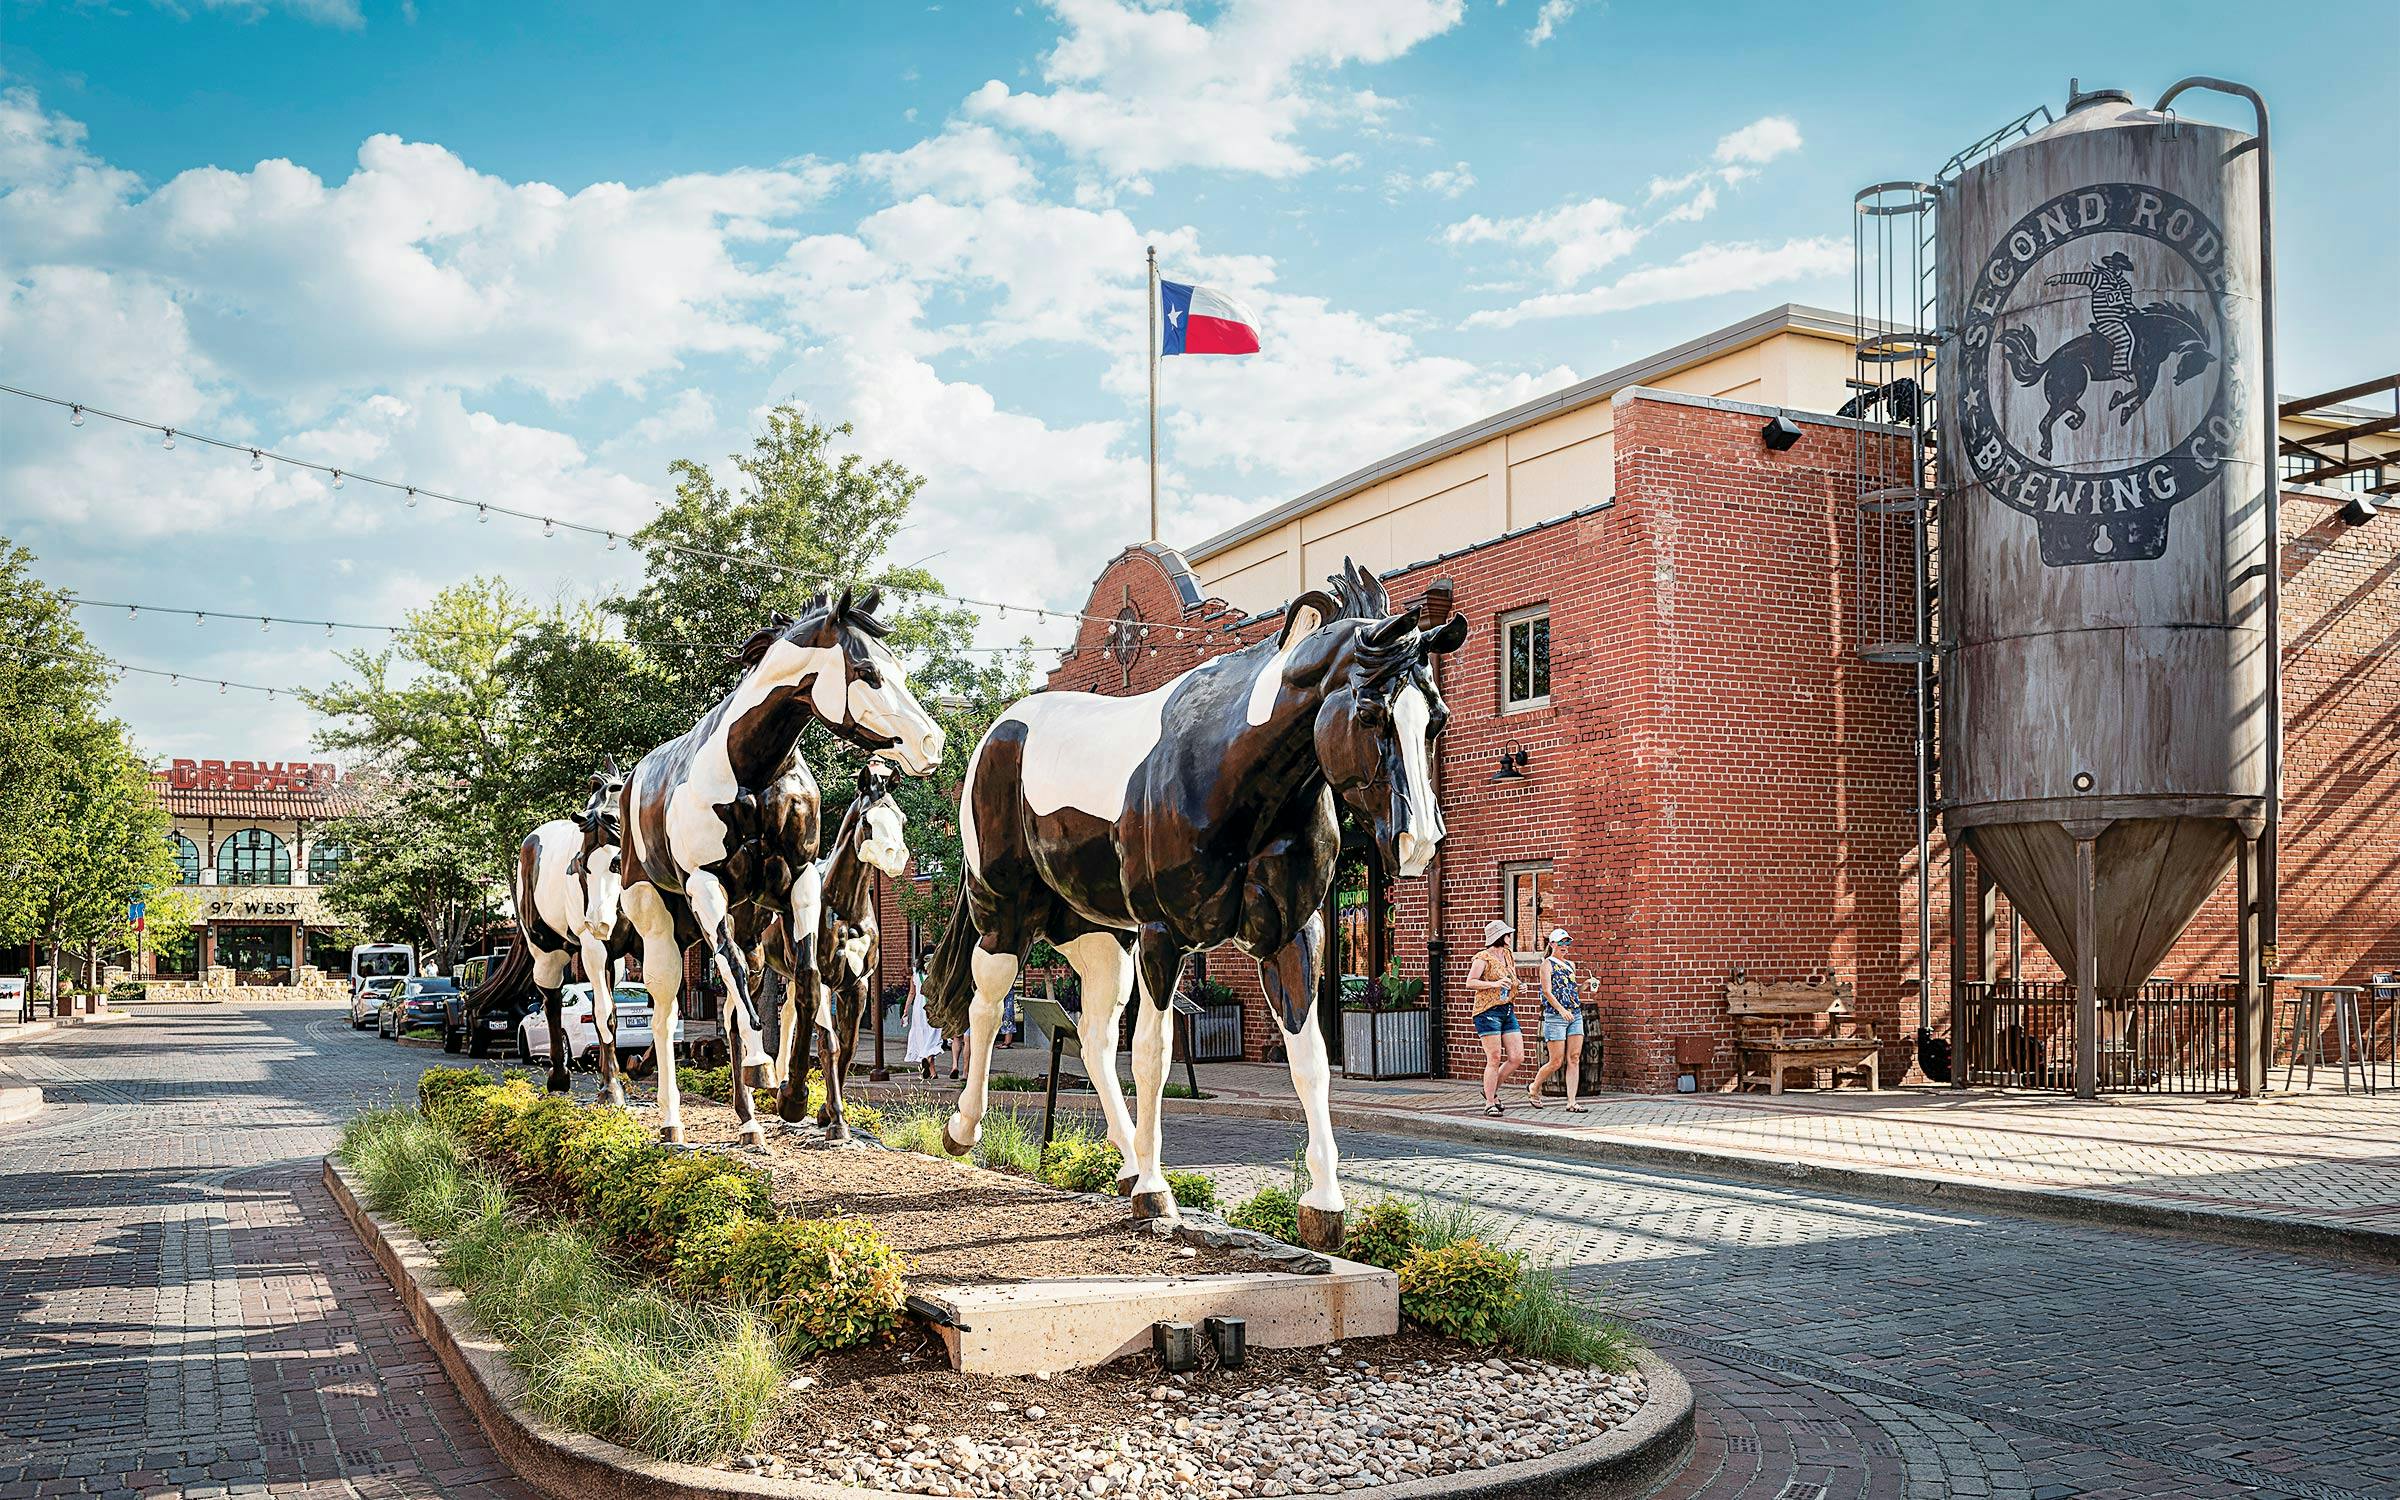 Touring The Fort Worth Stockyards In Fort Worth, Texas 